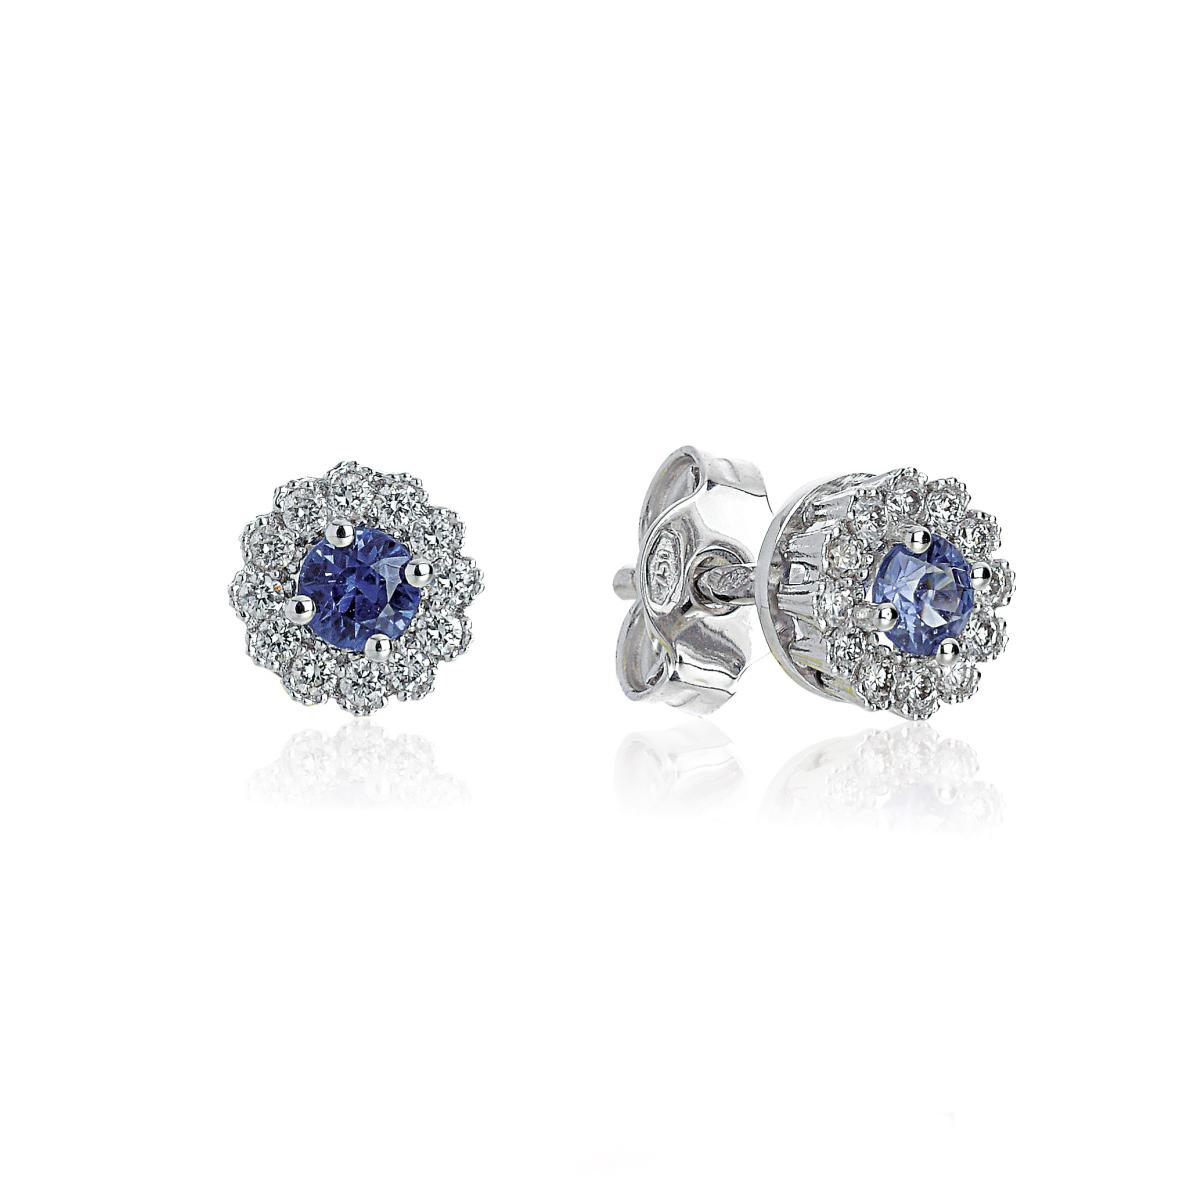 18kt white gold earrings with diamonds and central precious stones - OD380